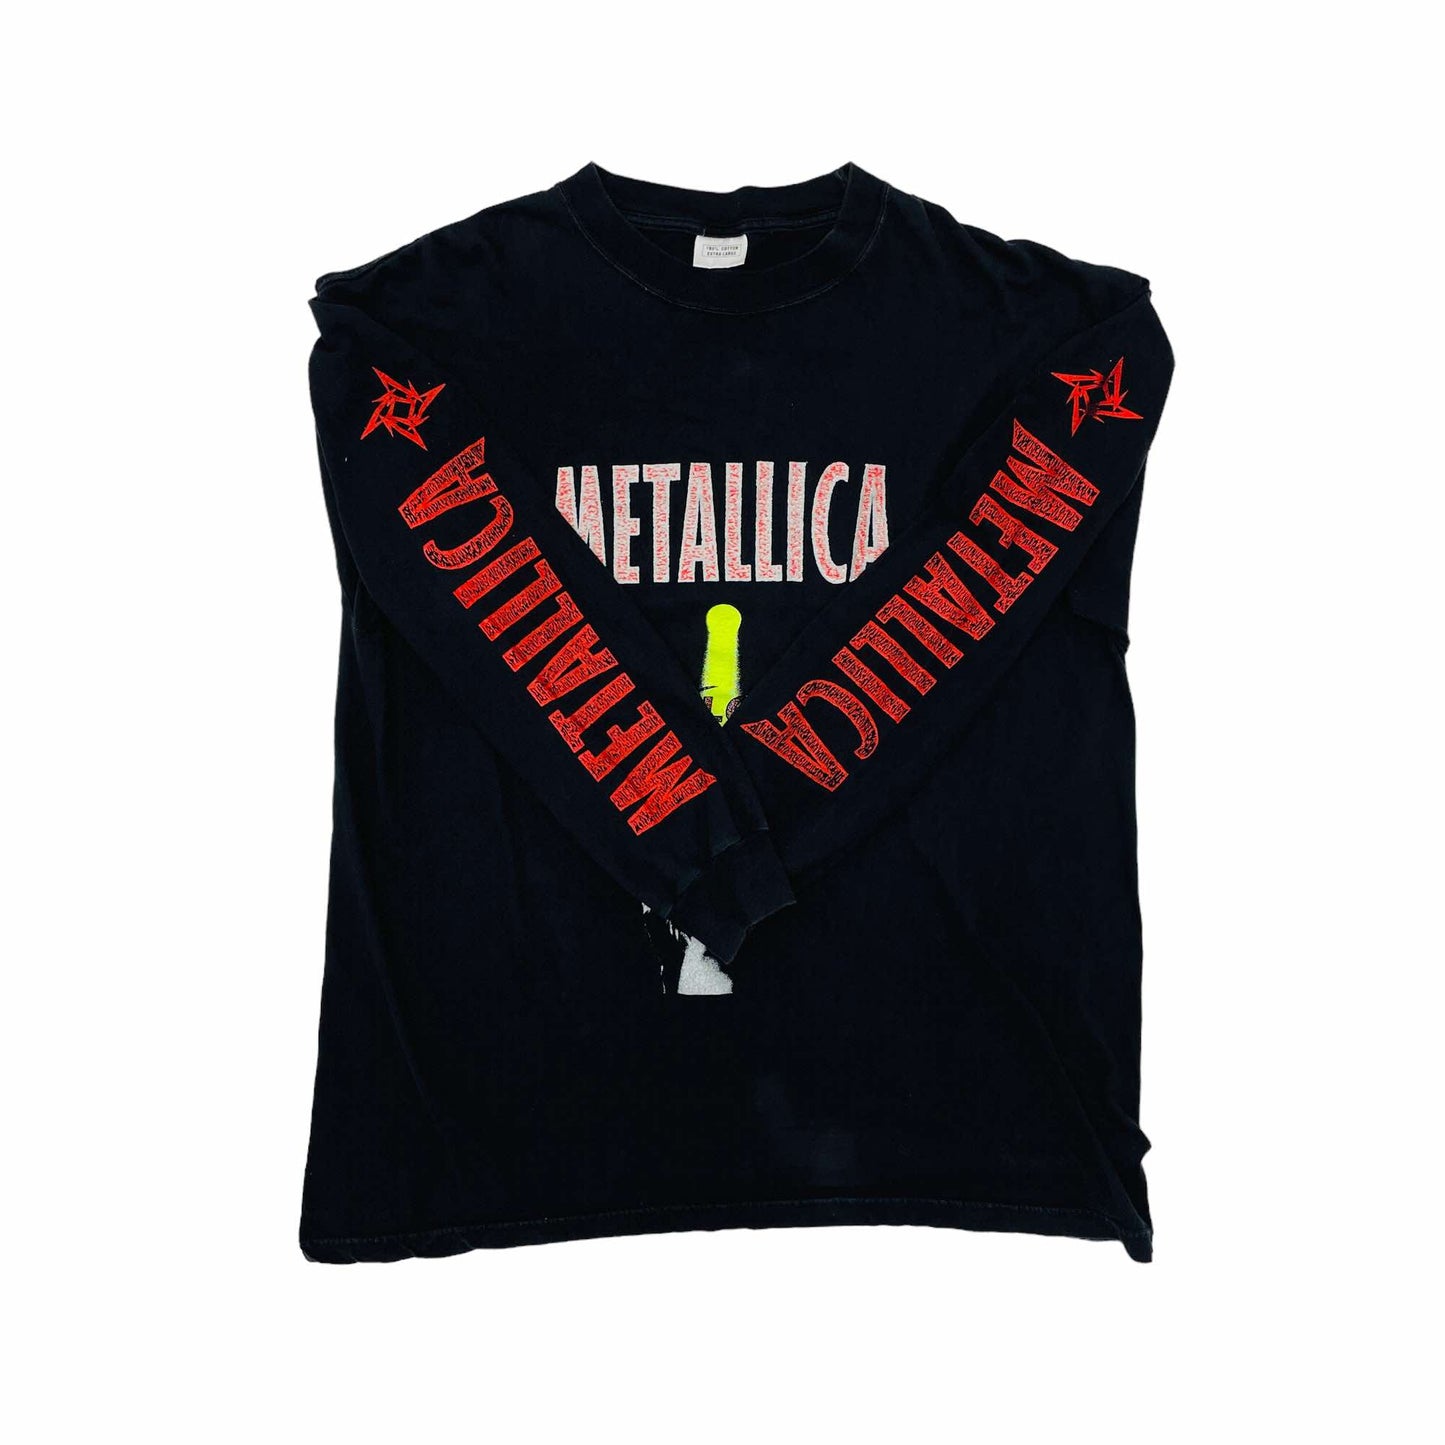 Metallica Reload Long Sleeve T-Shirt - XL – The Vintage Store